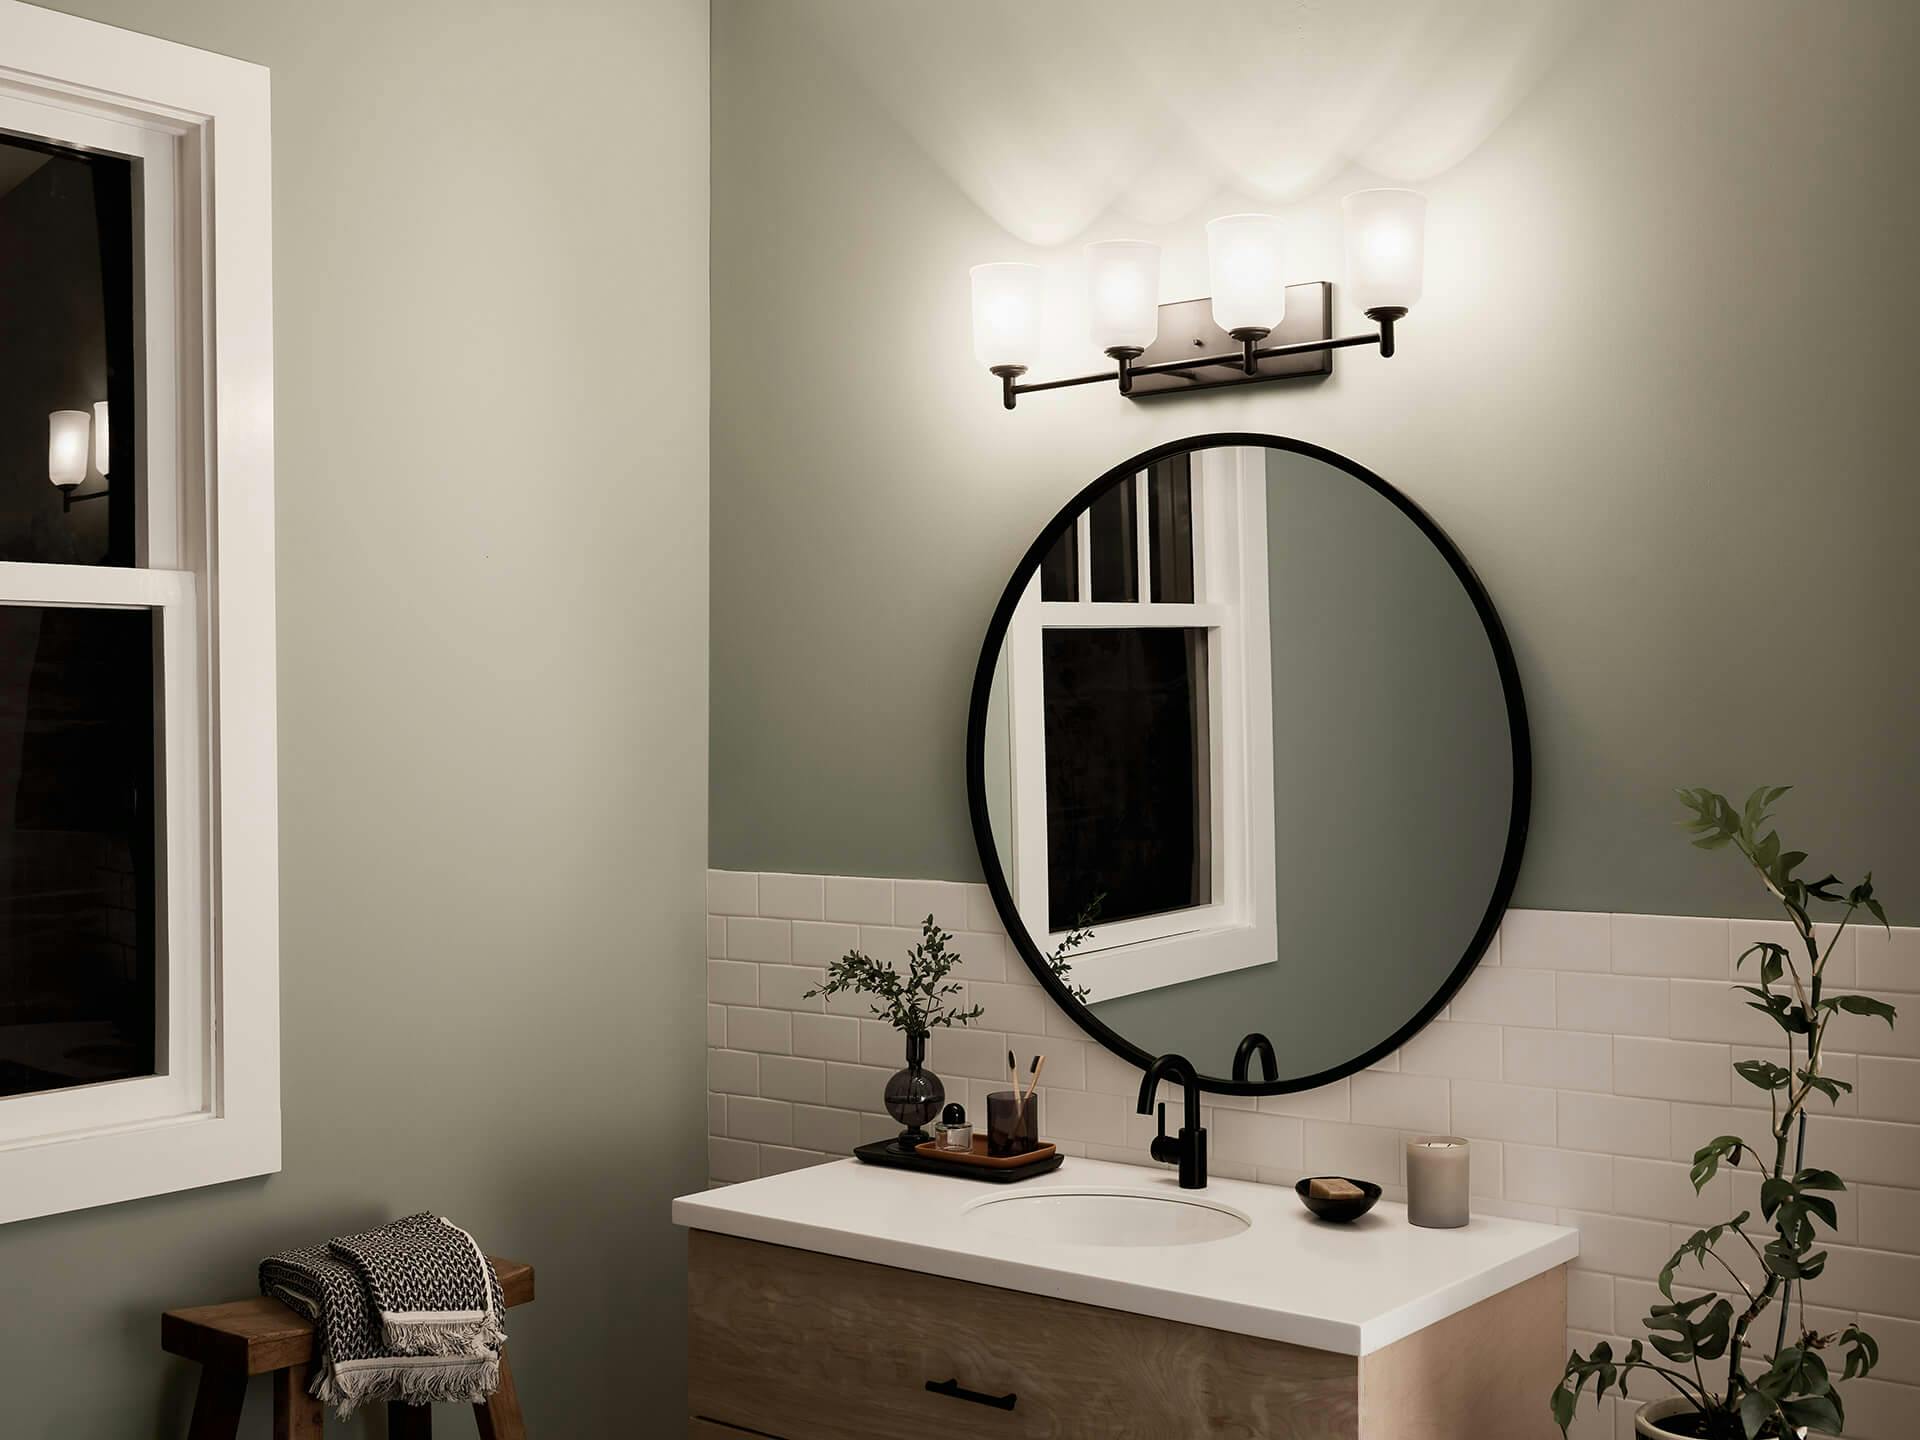 Corner of a bathroom vanity at night with a Shailene vanity light above a round mirror in black finish